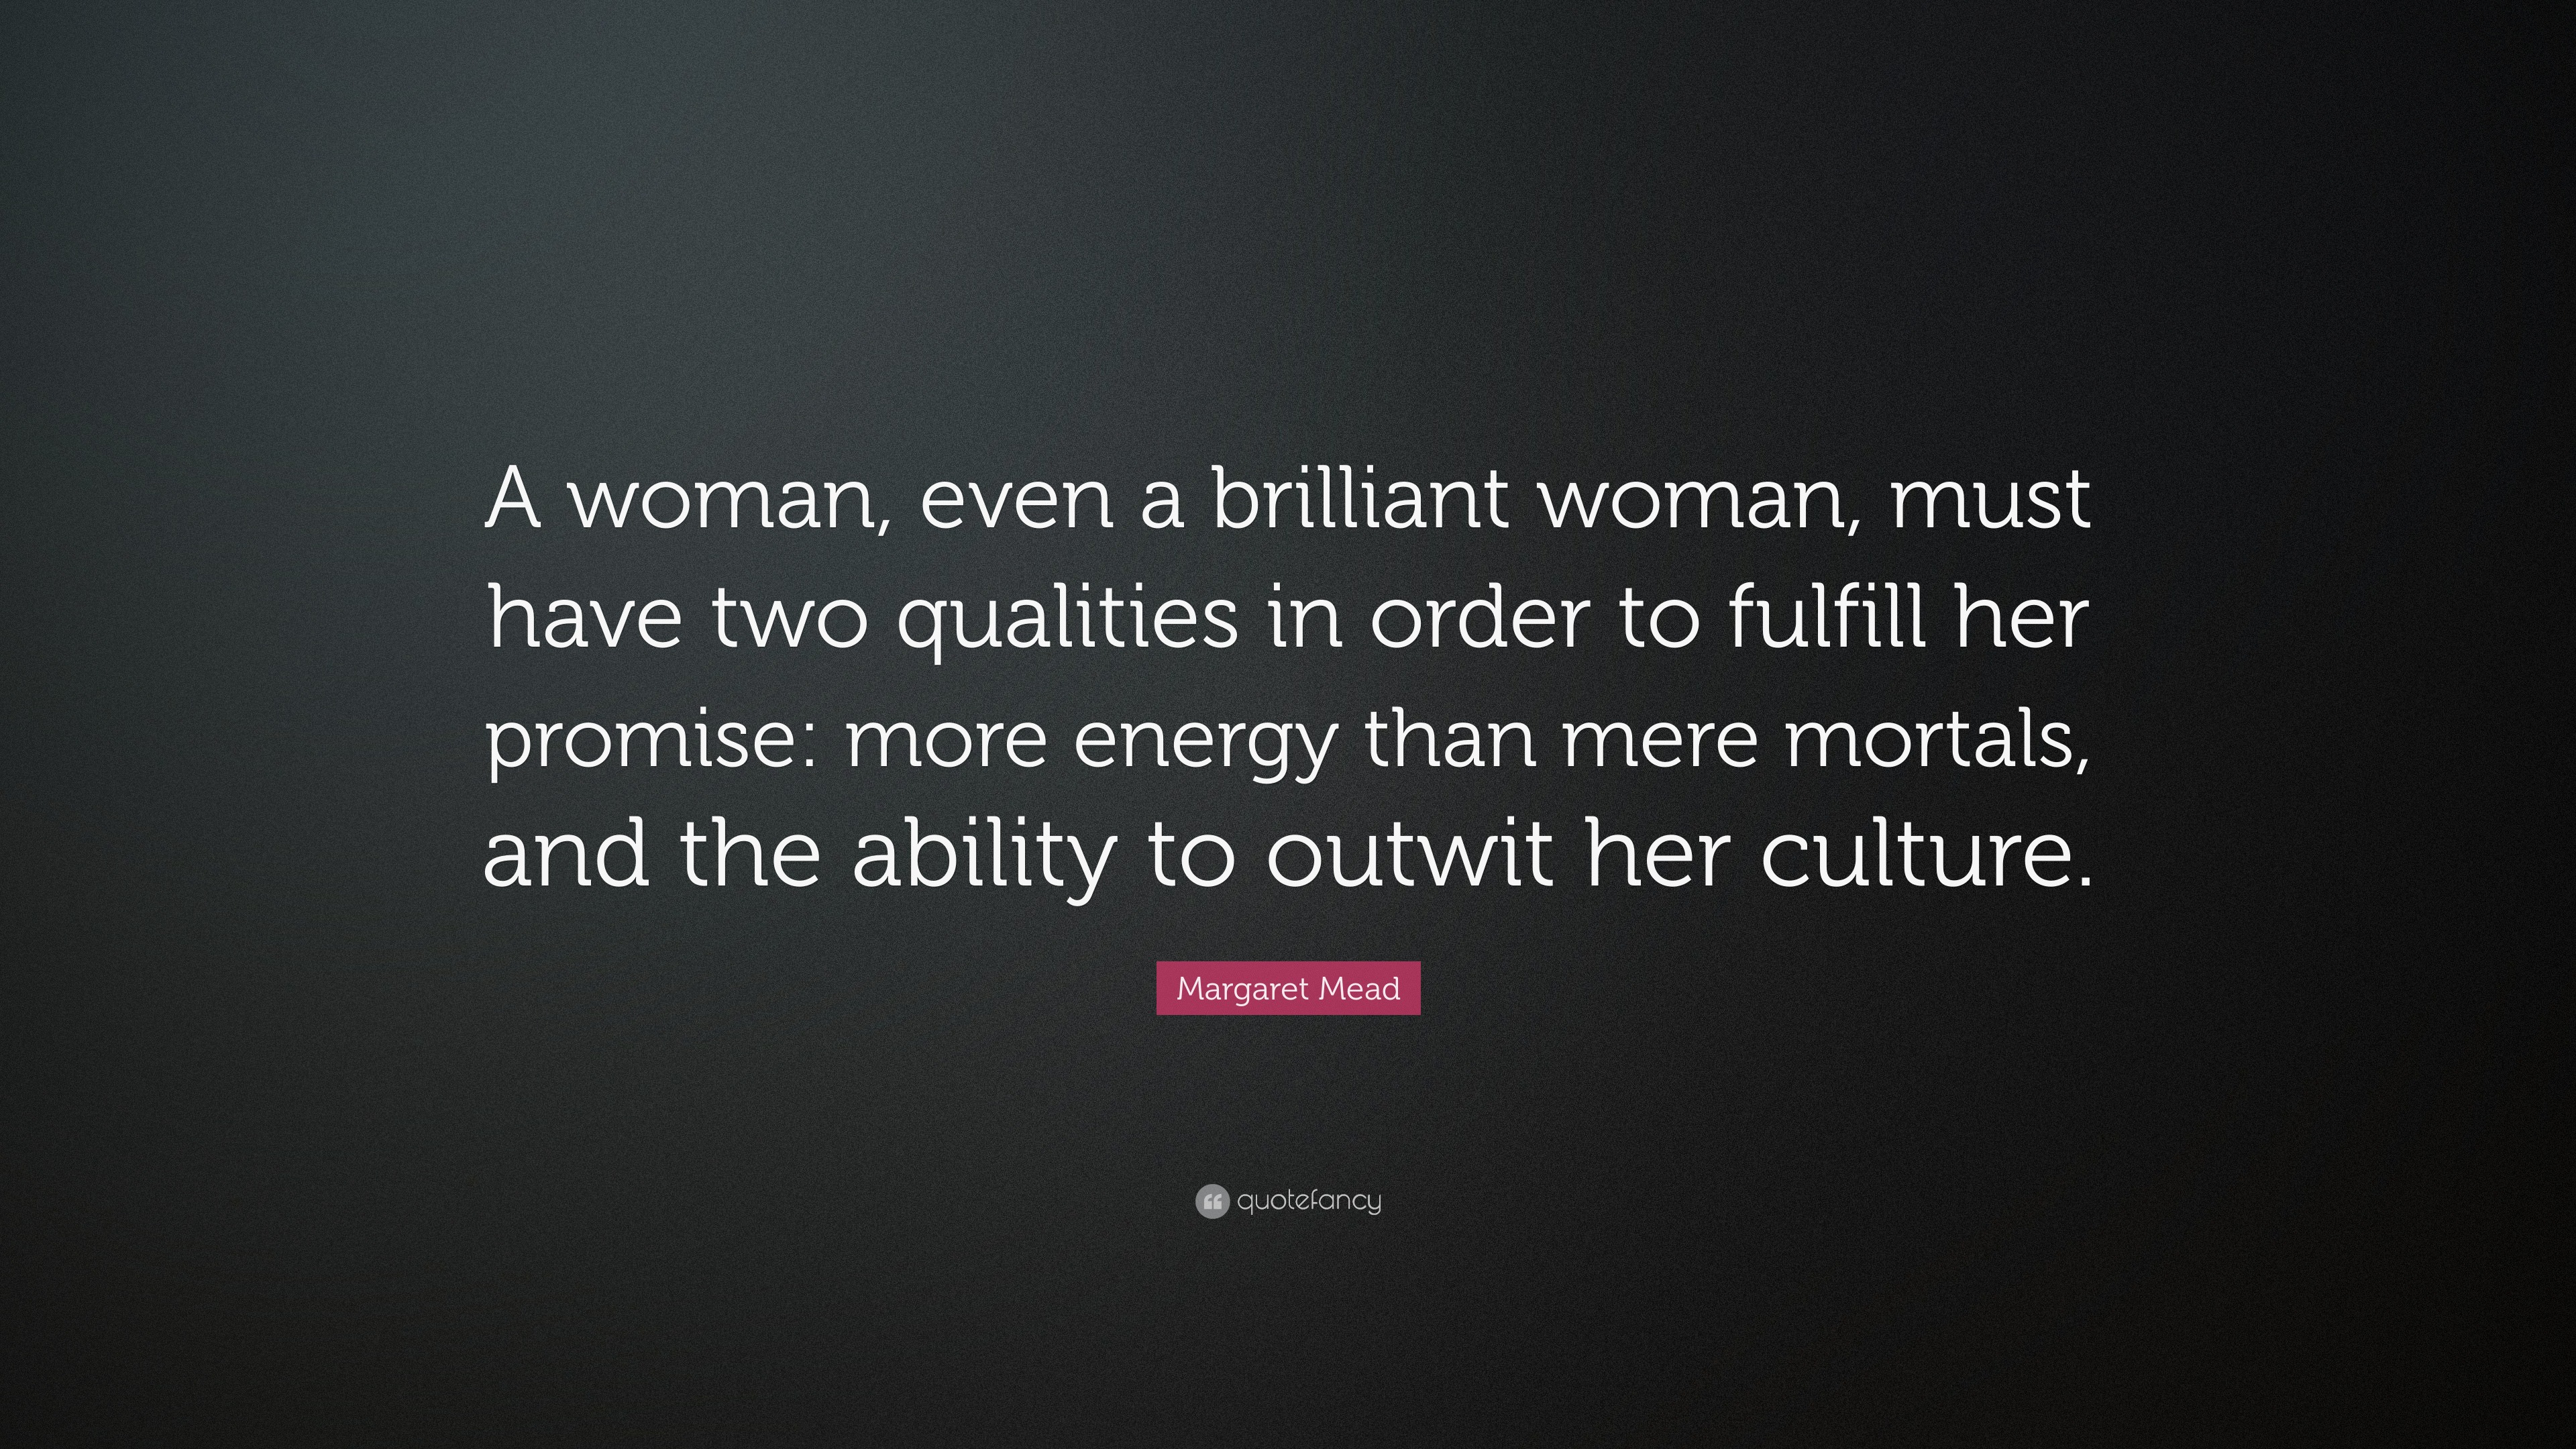 Margaret Mead Quote: “A woman, even a brilliant woman, must have